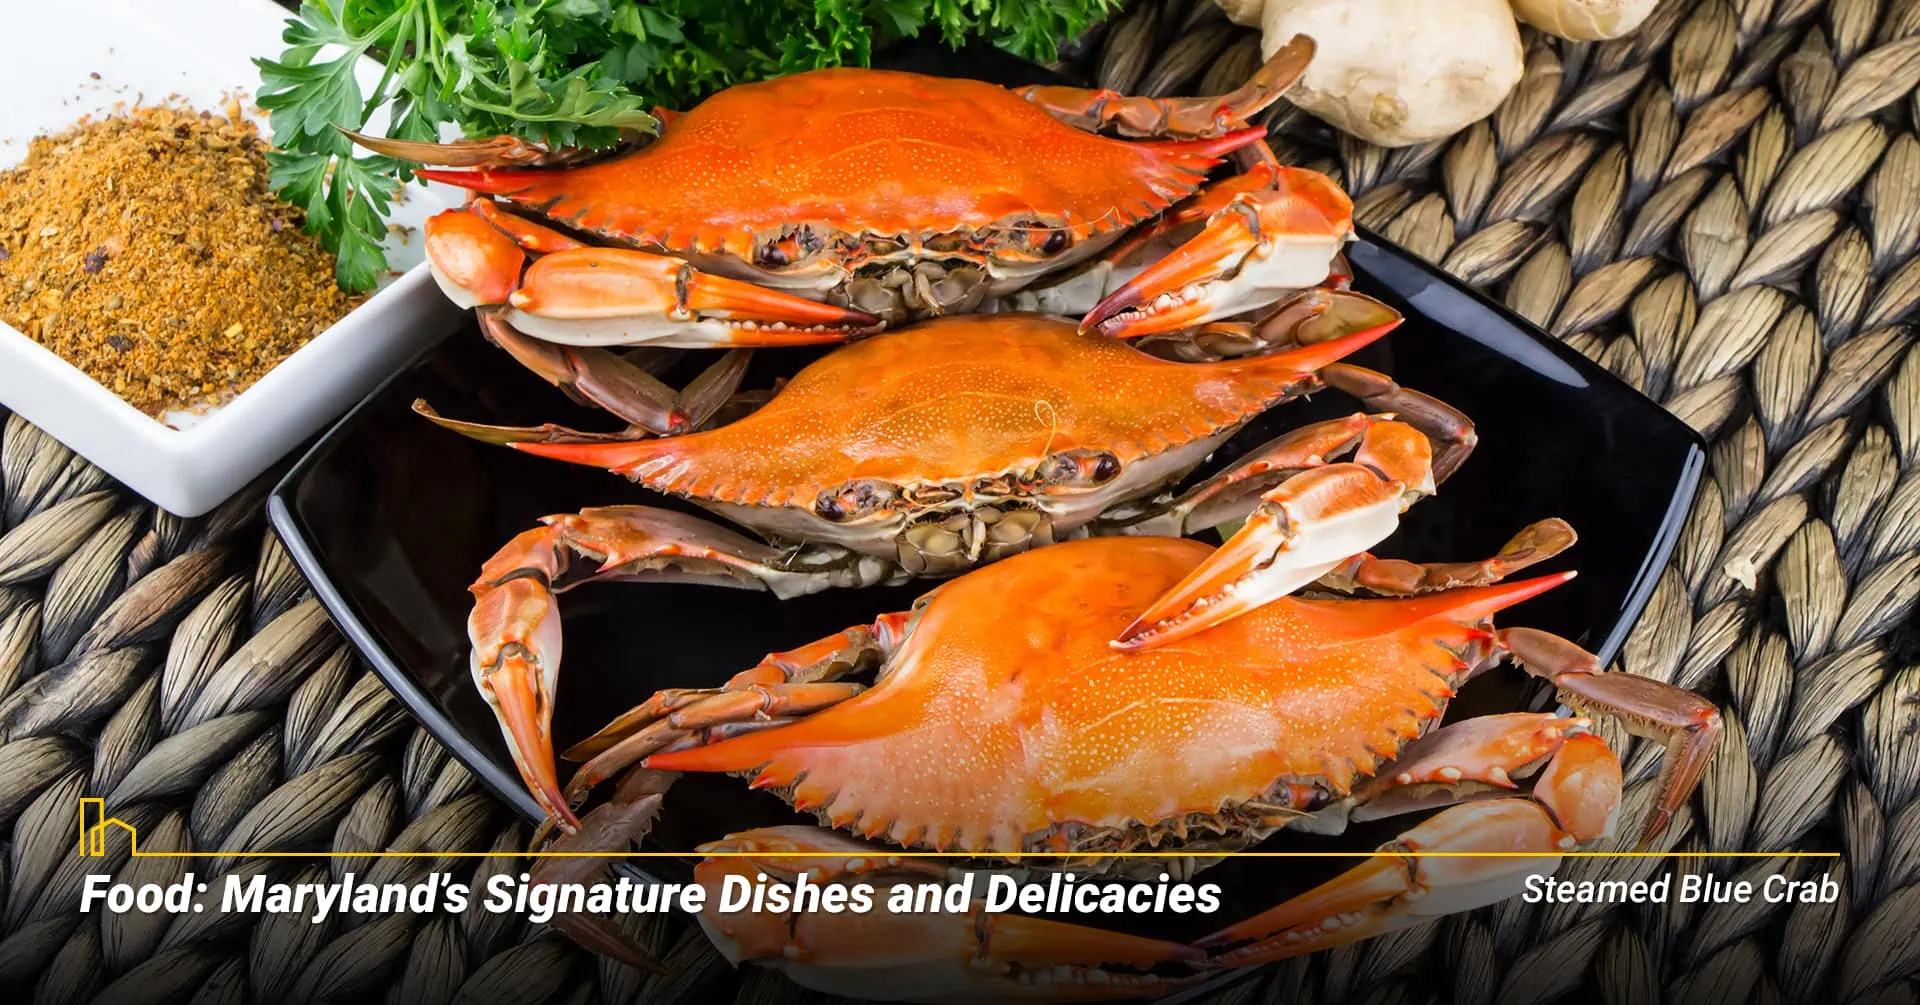 Food: Maryland’s Signature Dishes and Delicacies